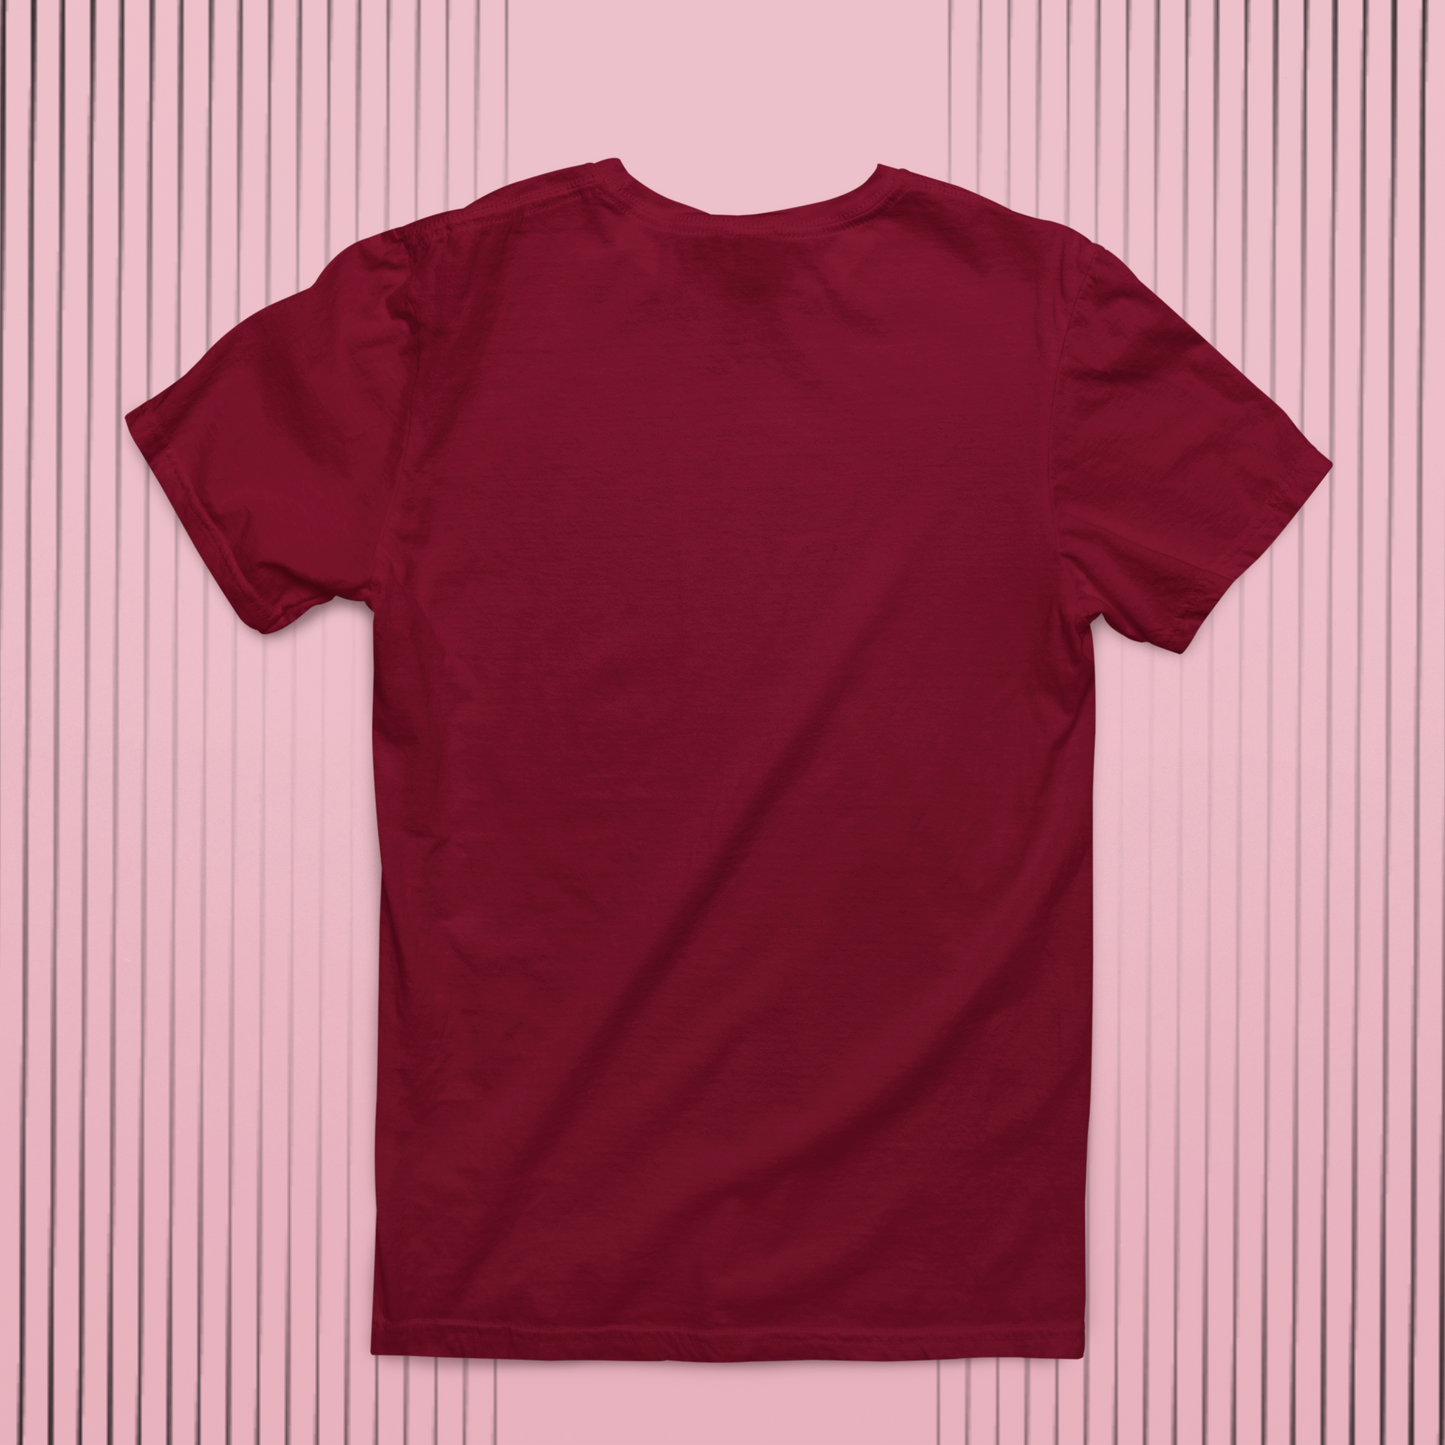 Maroon & Marine Blue T-Shirt Combo : Classic Comfort, Elevated Style